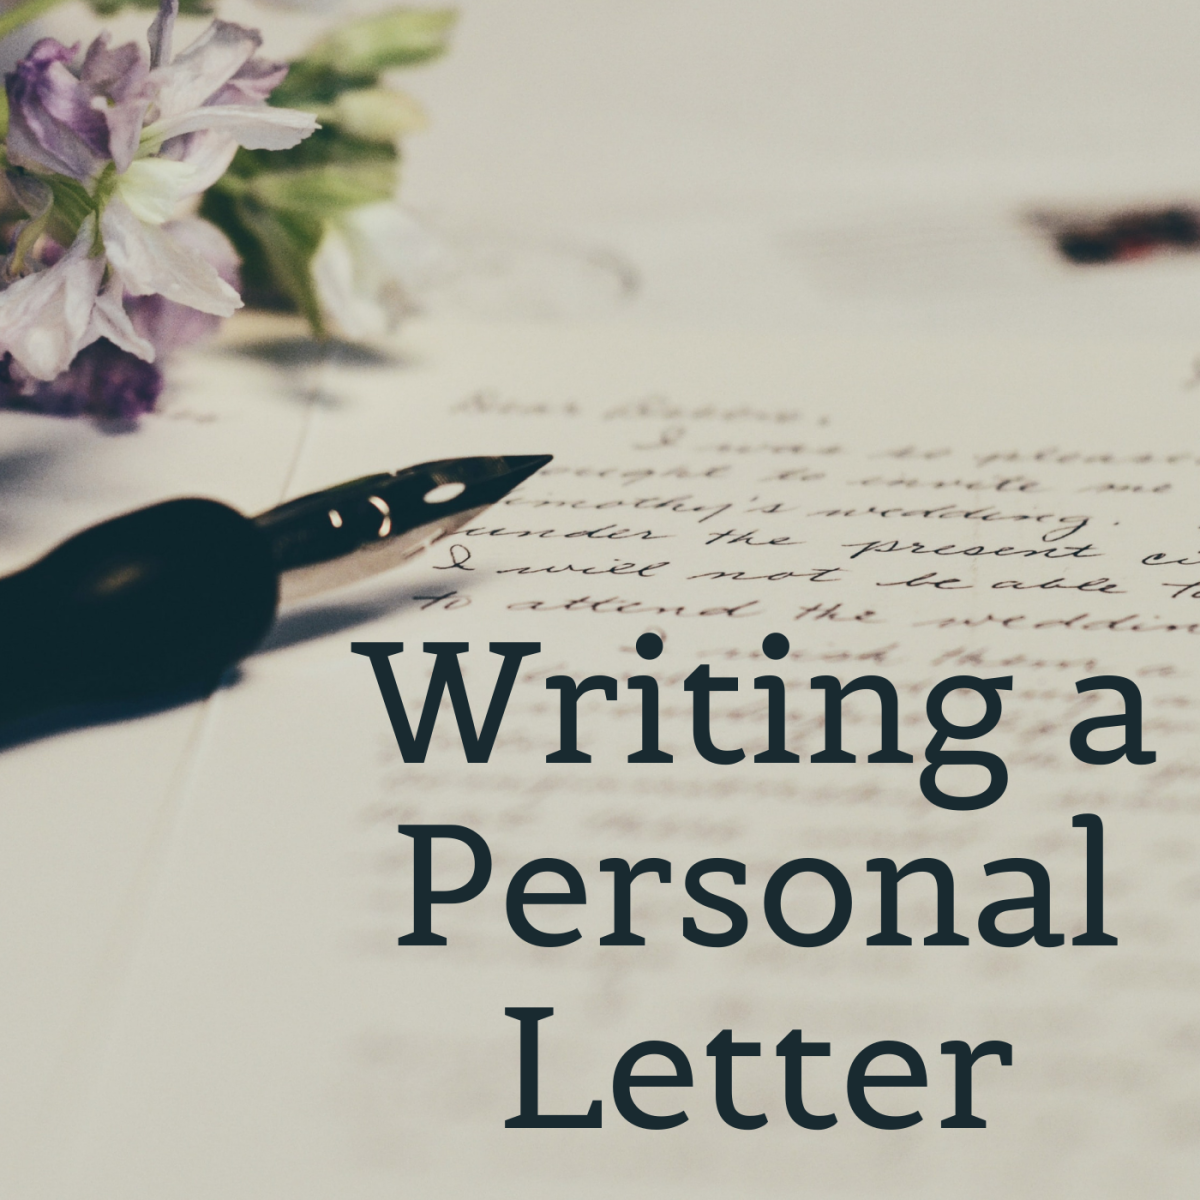 Learn how to write a personal letter and why it's important to maintain this art form.